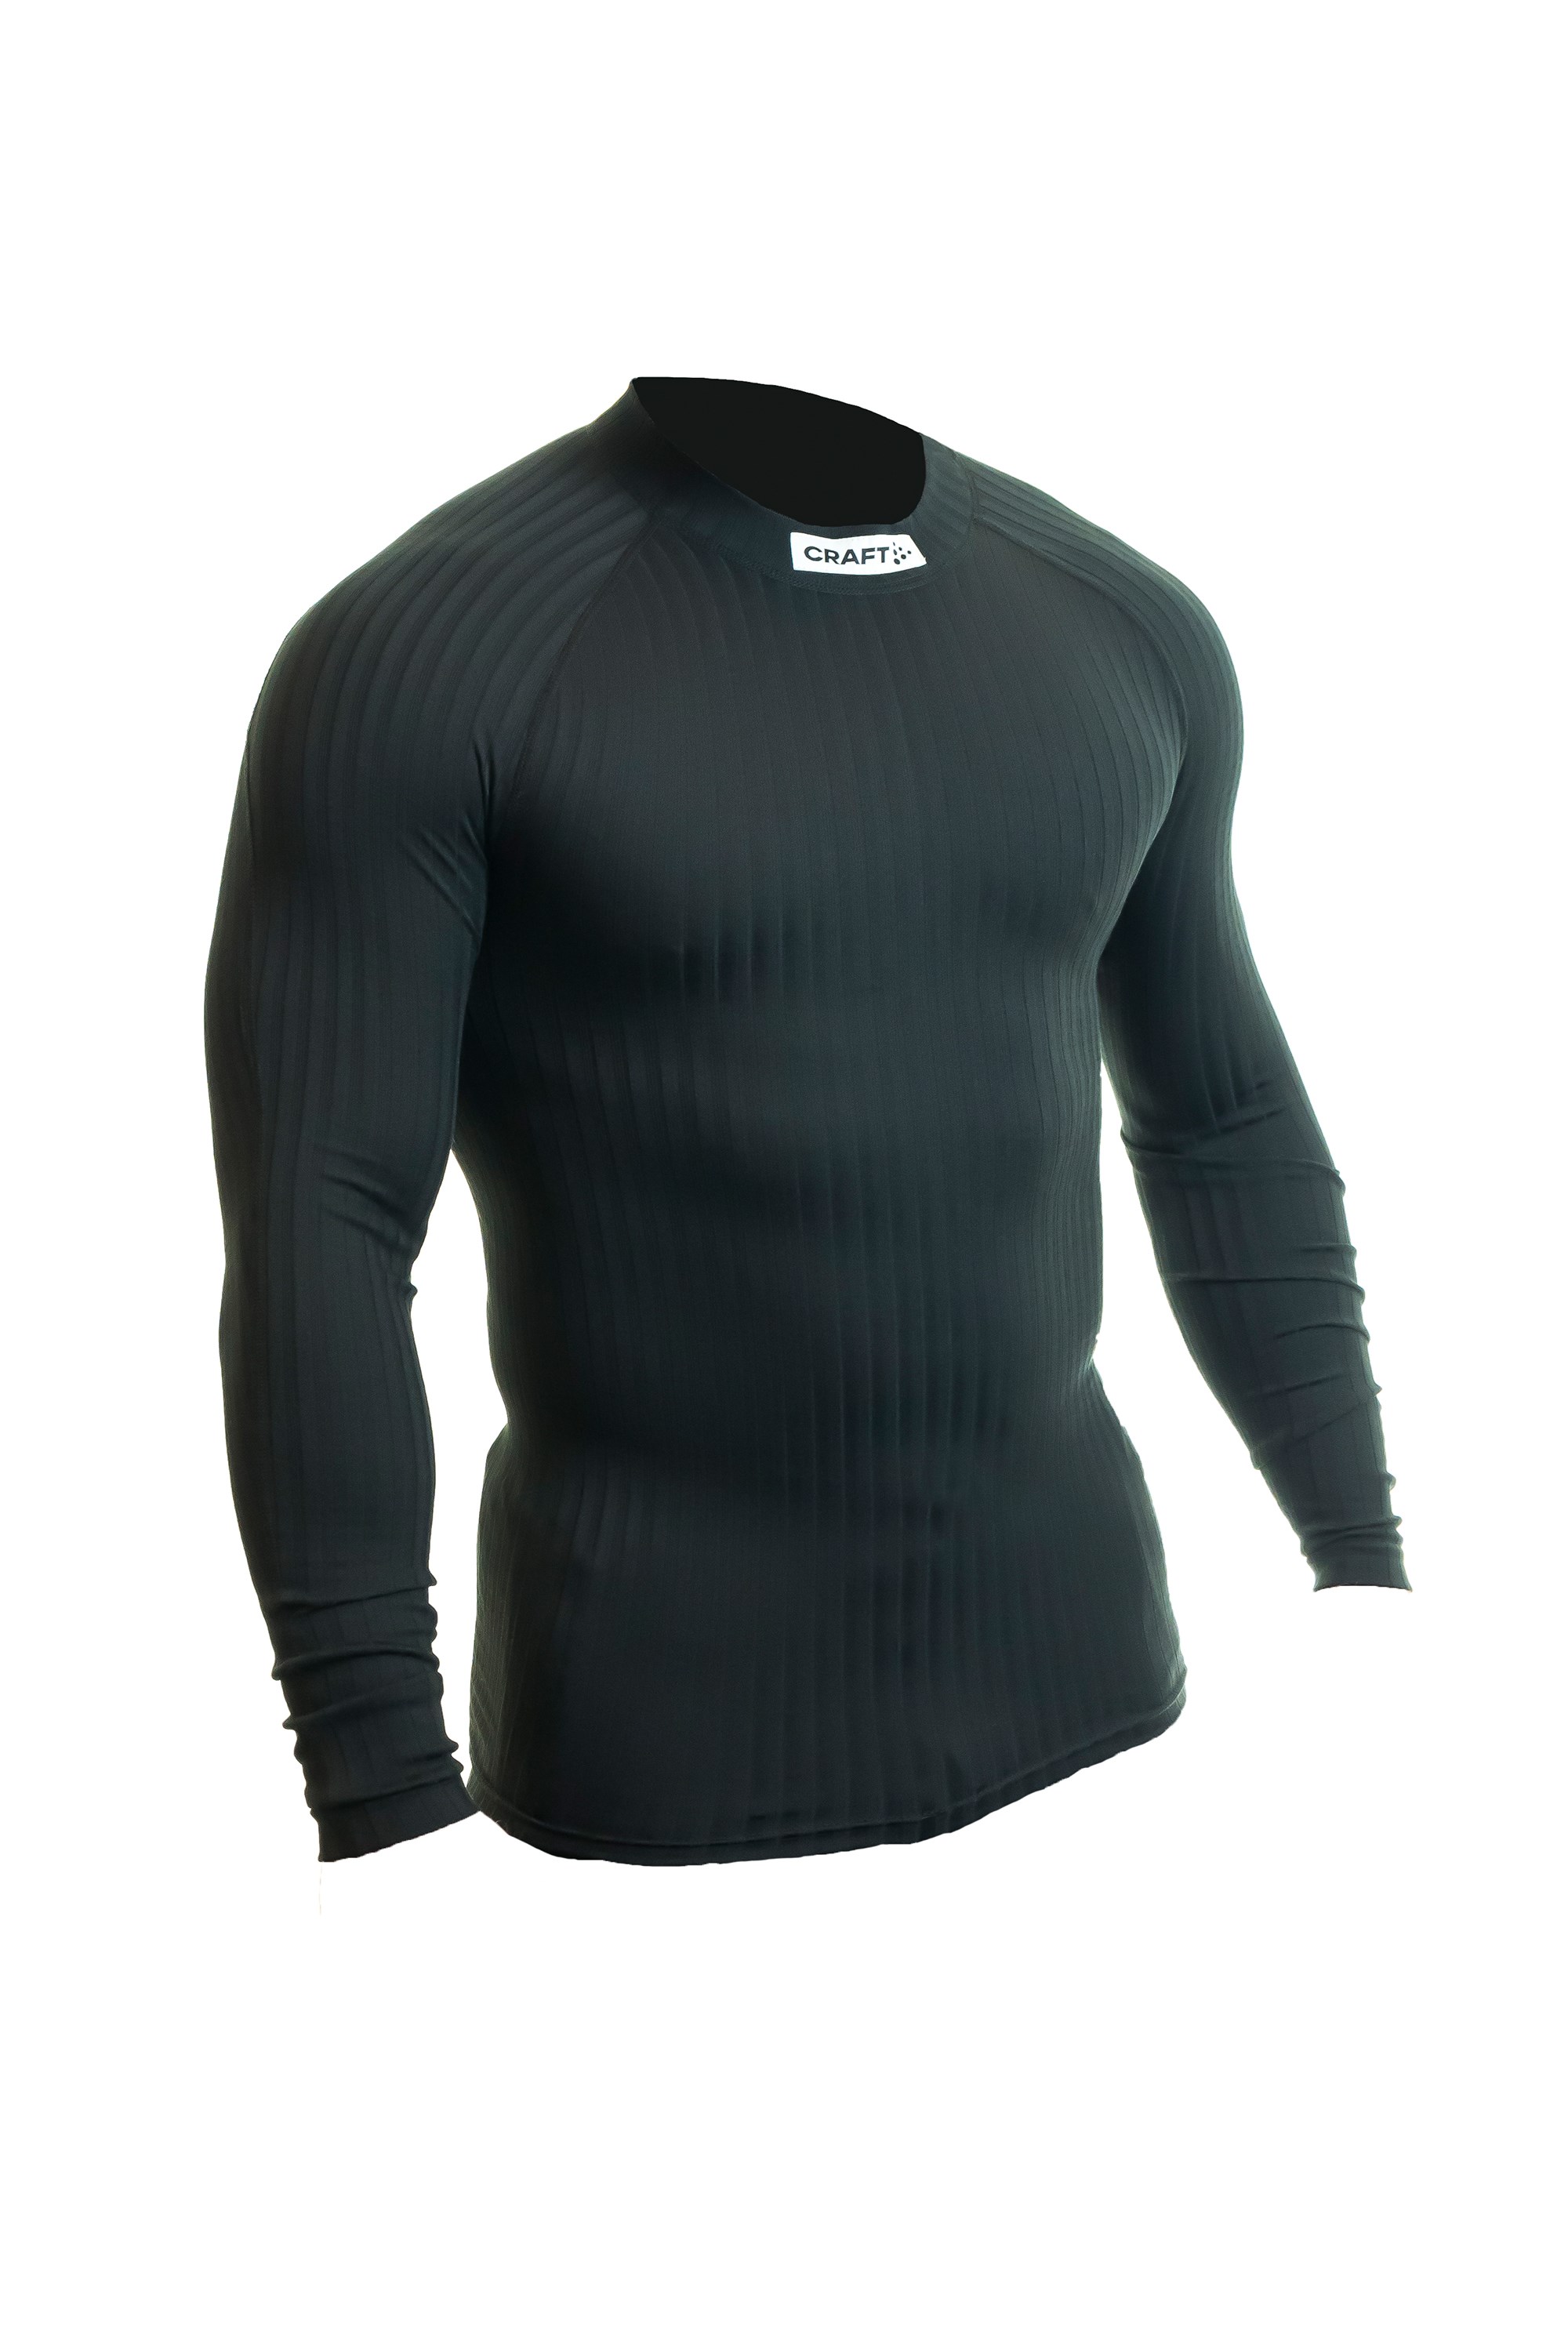 Active Extreme Mens Long Sleeve Base Layer Top -